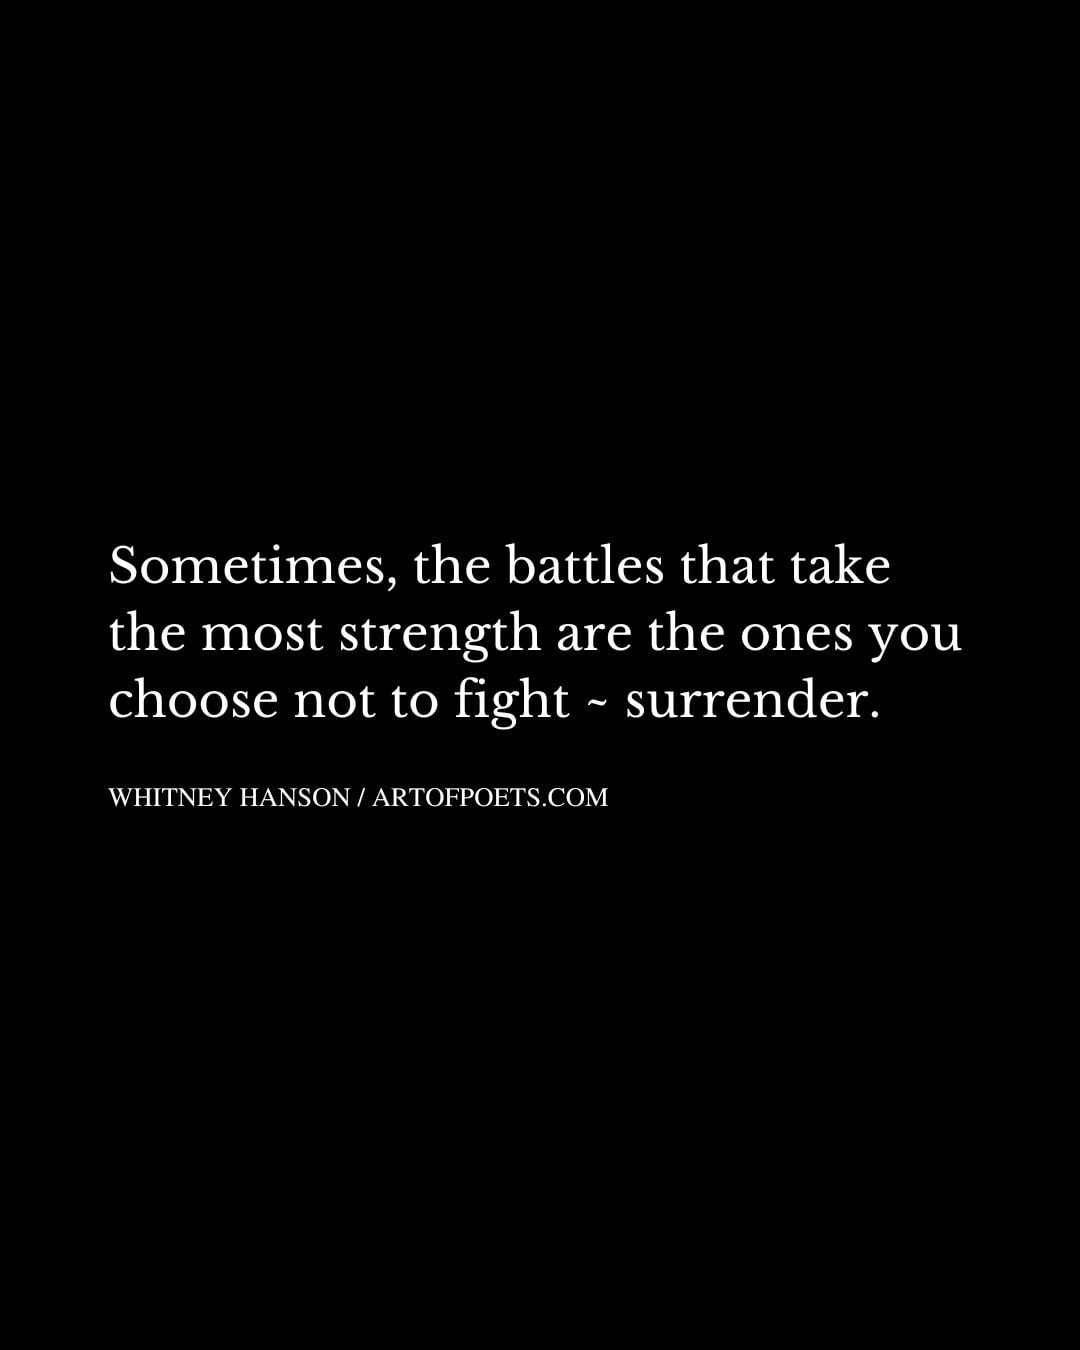 Sometimes the battles that take the most strength are the ones you choose not to fight surrender